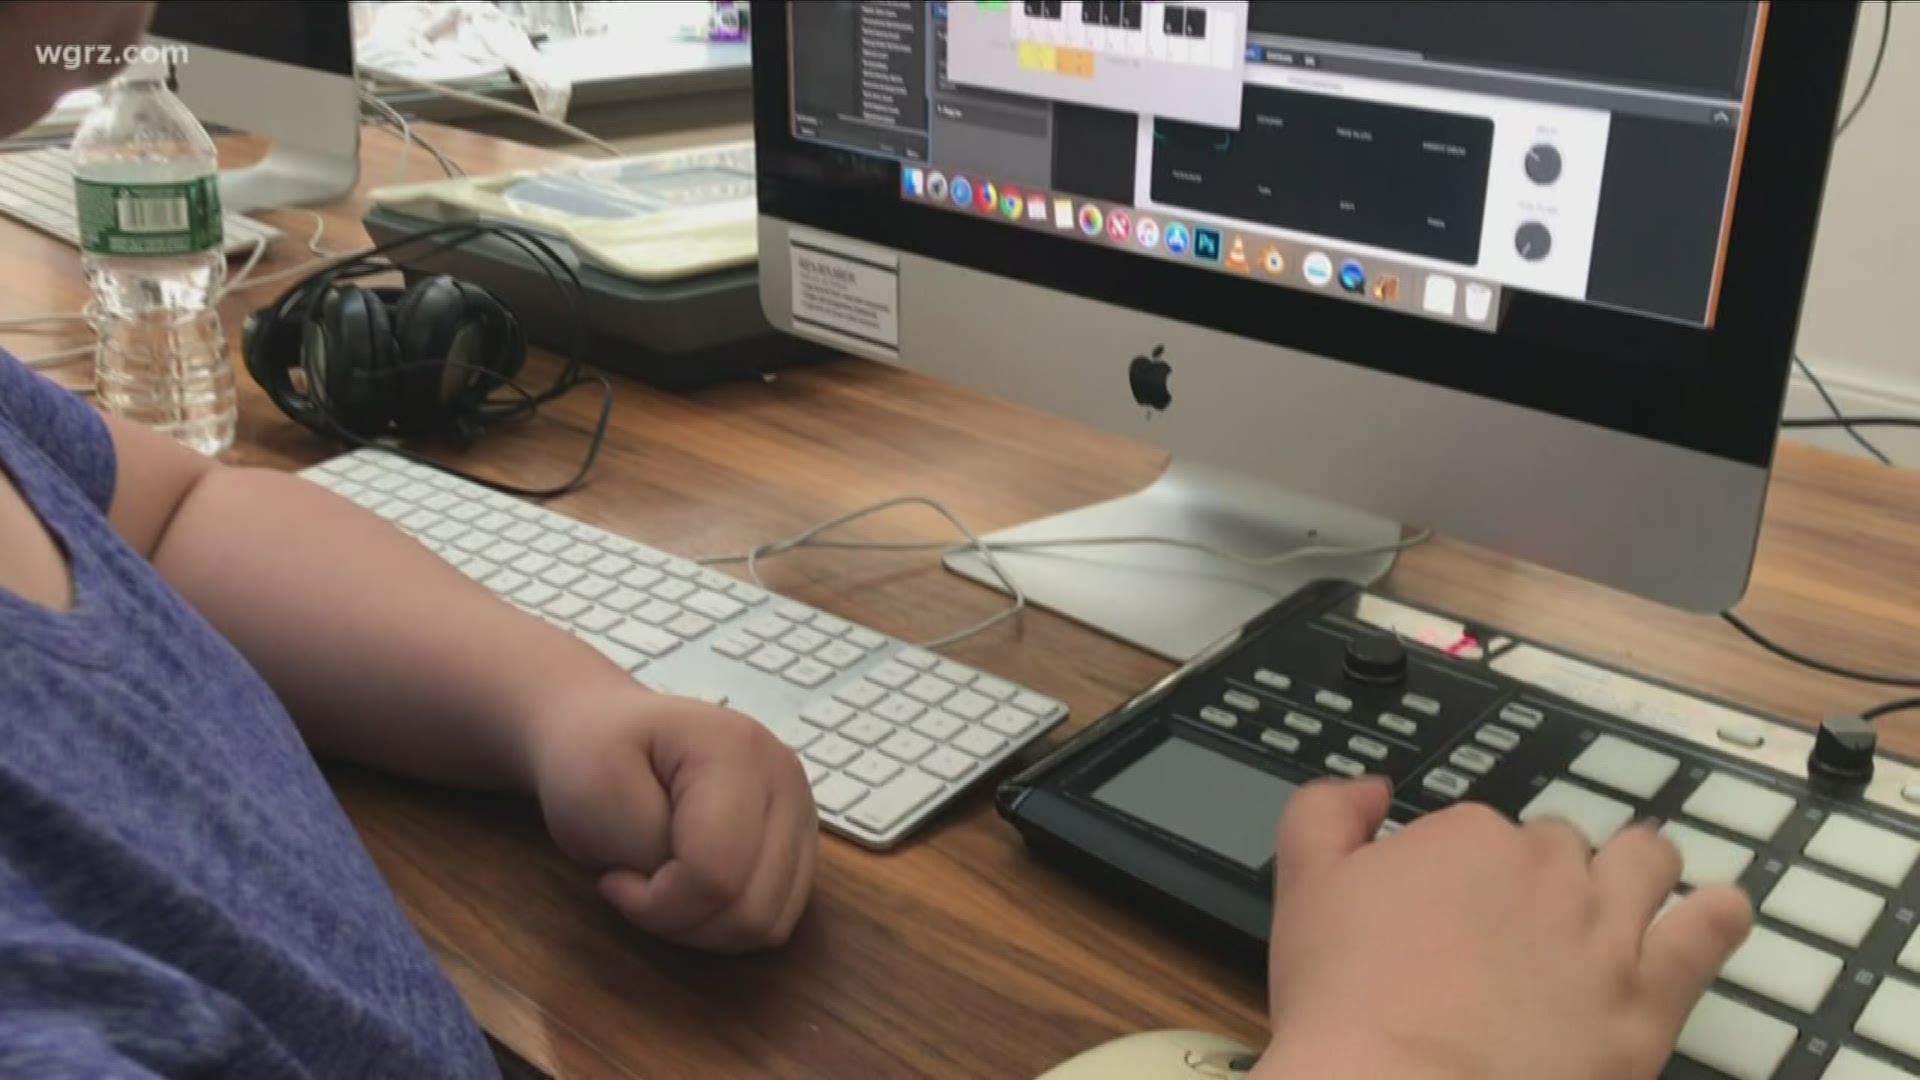 Squeaky Wheel's "DATA" (Digital Arts and Technology Access Program) gives teens on the autism spectrum the chance to go to arts workshops designed with their needs.